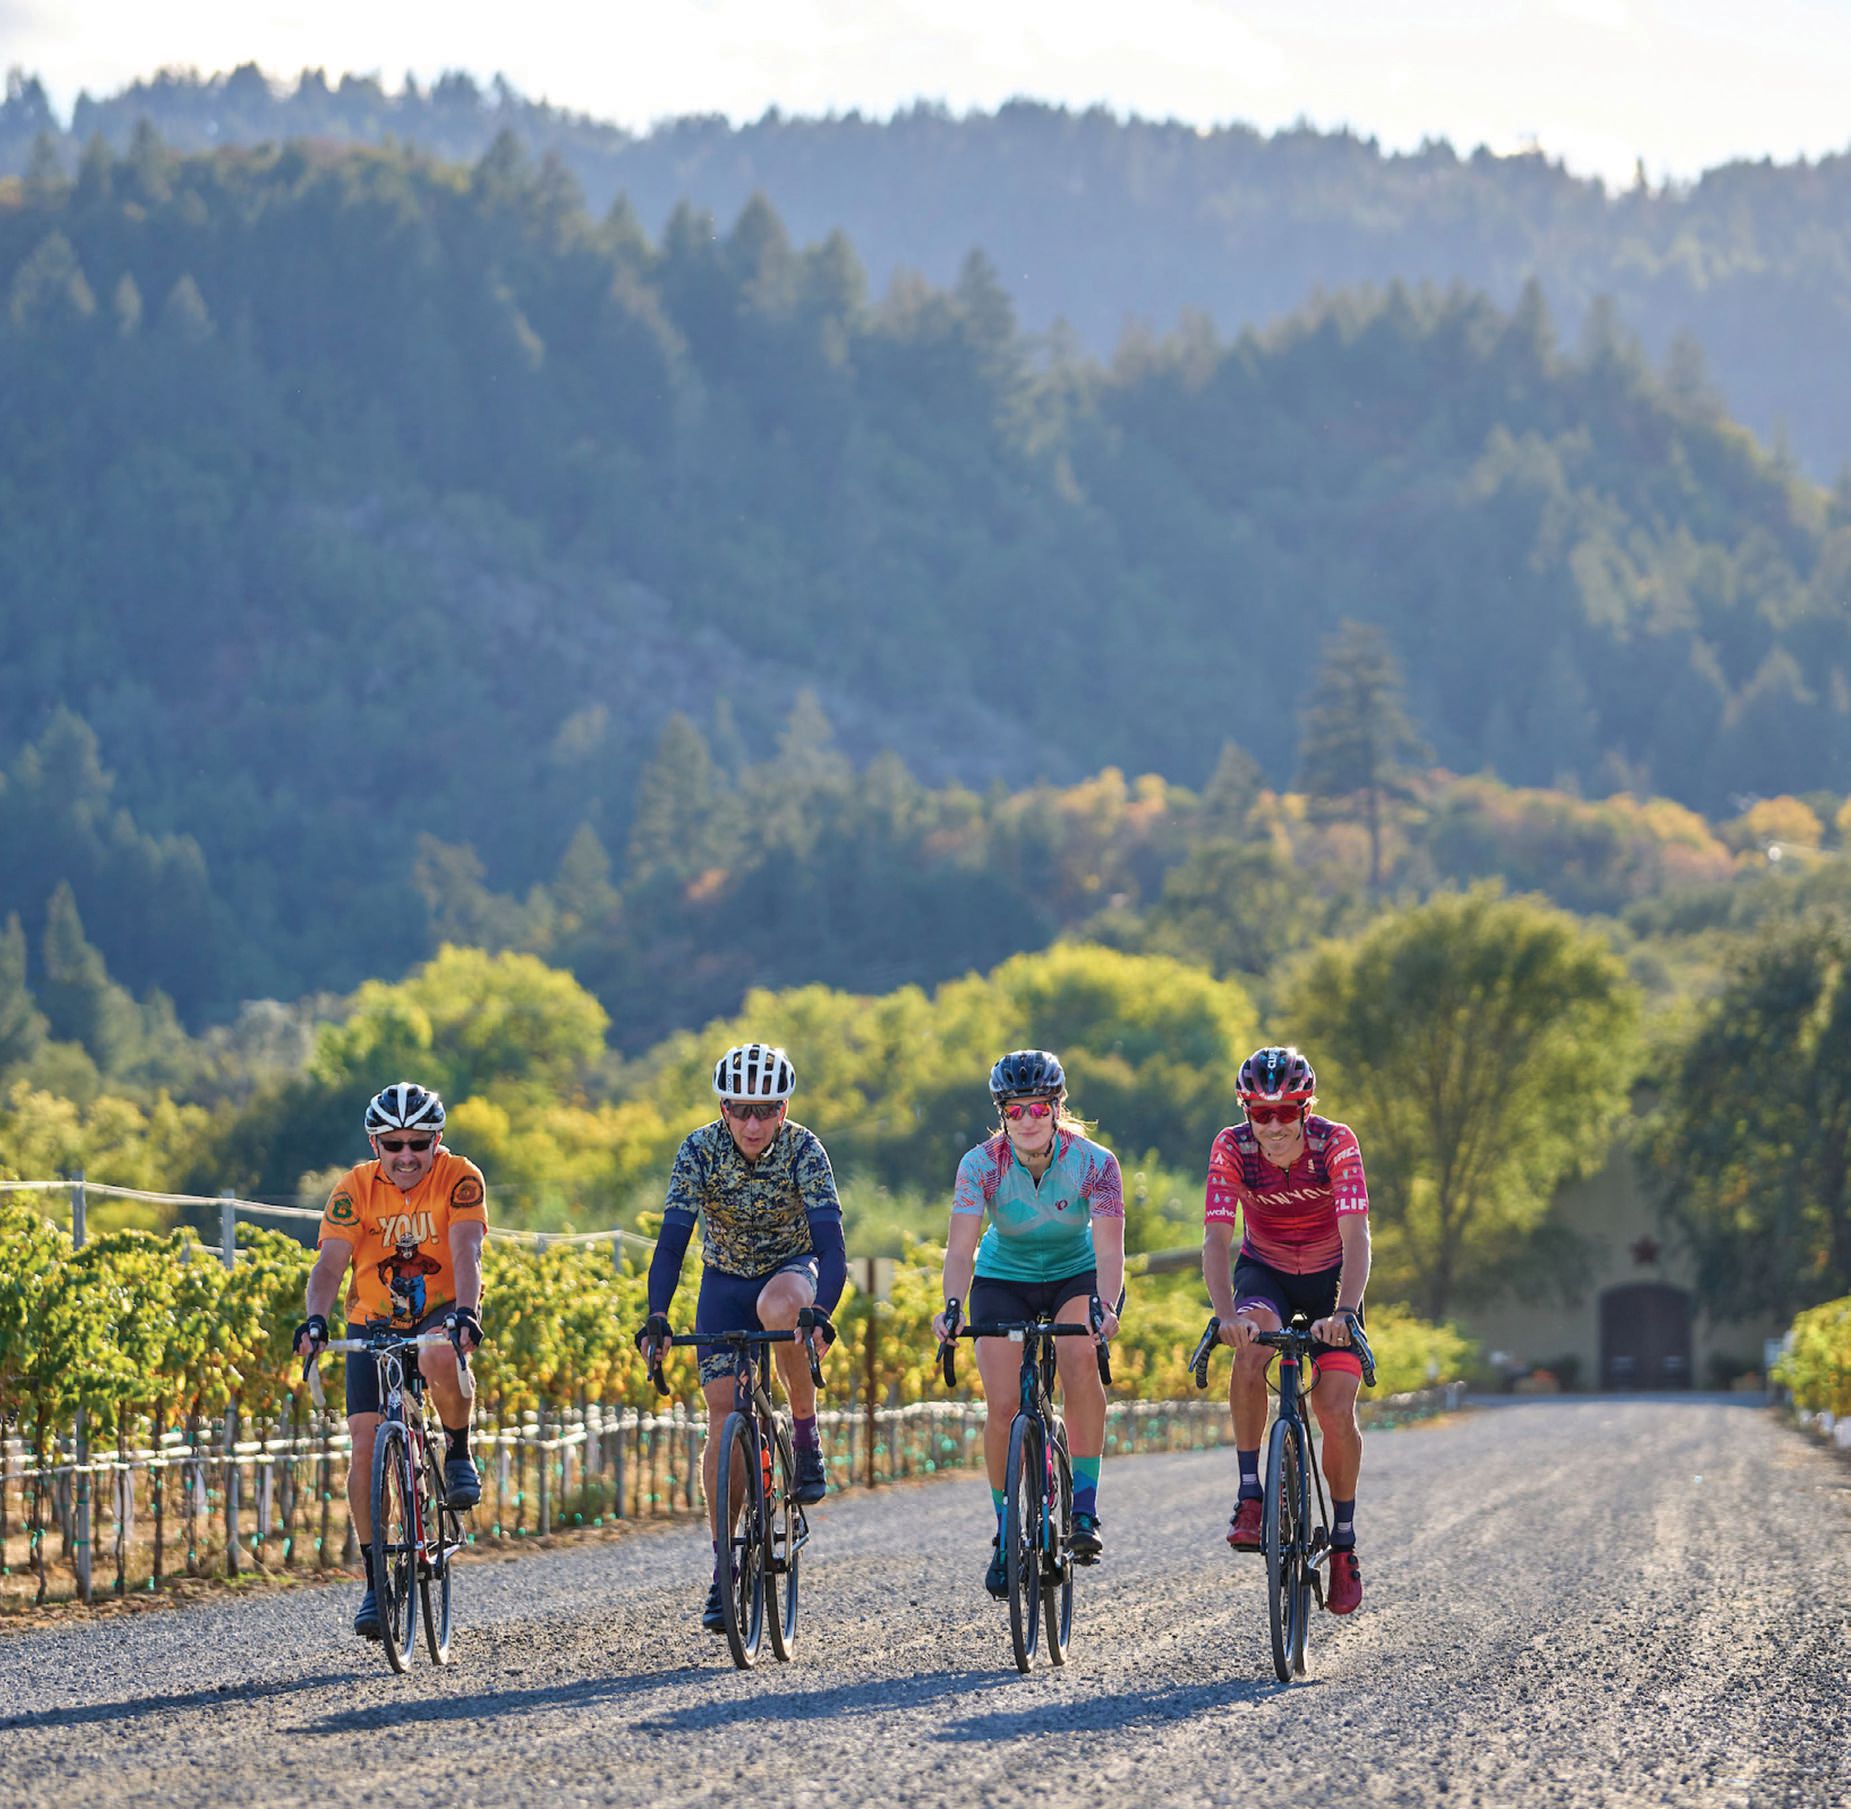 Peter Stetina (far right) will customize rides with guests of the Healdsburg Hotel and its sister properties through Sonoma. PHOTO COURTESY OF HOTEL HEALDSBURG